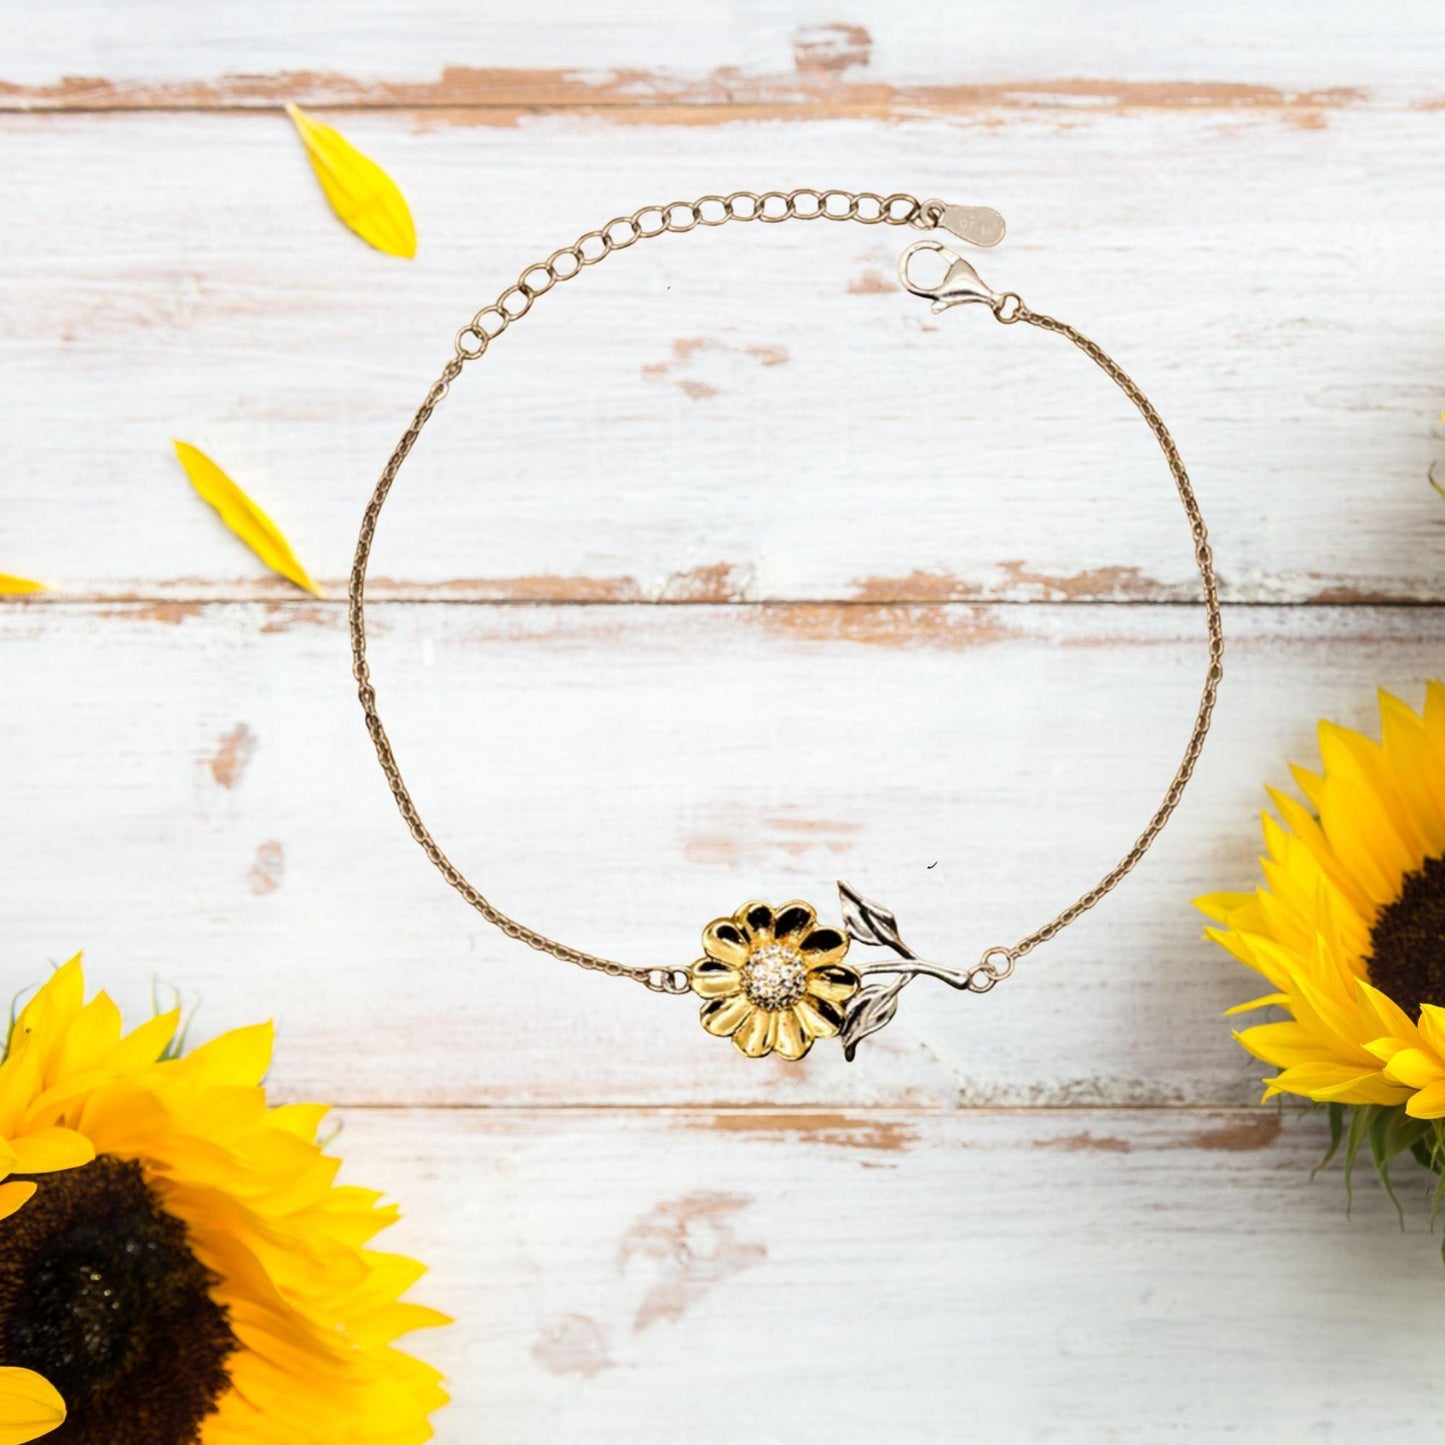 Mail Carrier Sunflower Bracelet - Thanks for being who you are - Birthday Christmas Jewelry Gifts Coworkers Colleague Boss - Mallard Moon Gift Shop